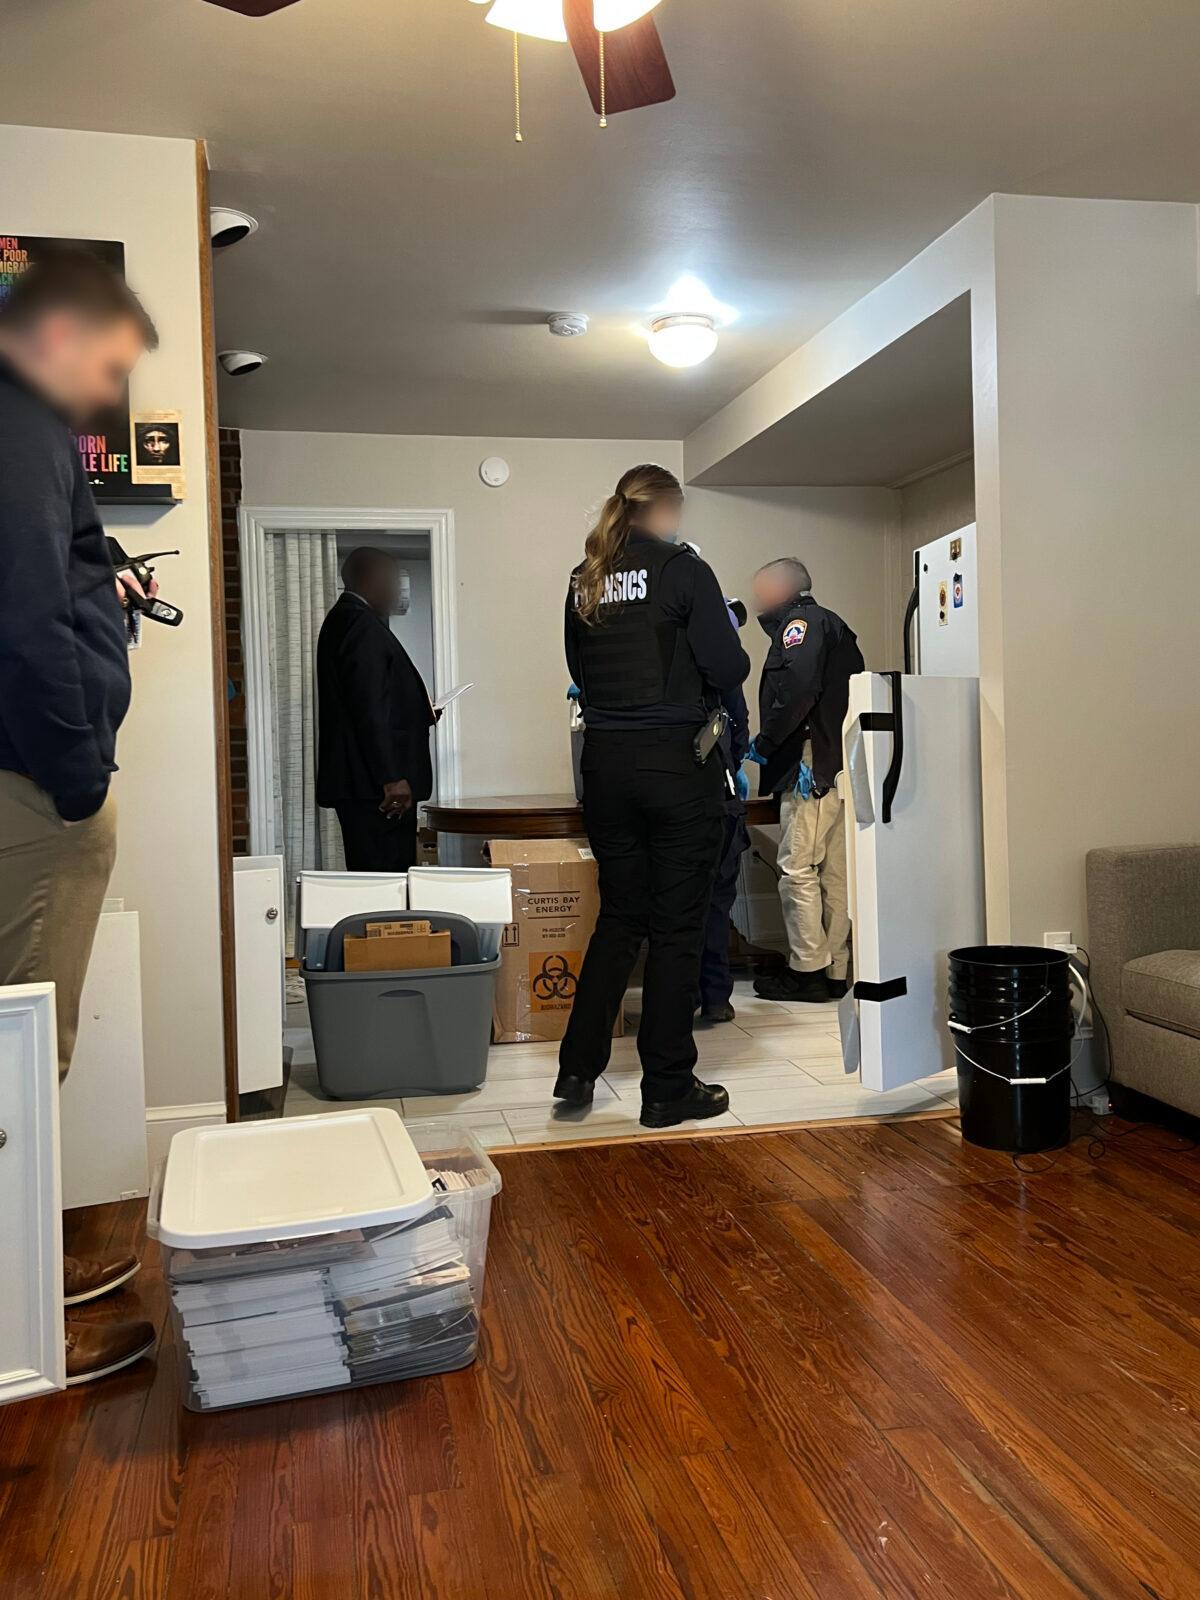 Police collect five infant bodies from Lauren Handy's apartment in Washington, DC on March 30, 2020. (Courtesy of Terrisa Bukovinac/Face blur by The Epoch Times)